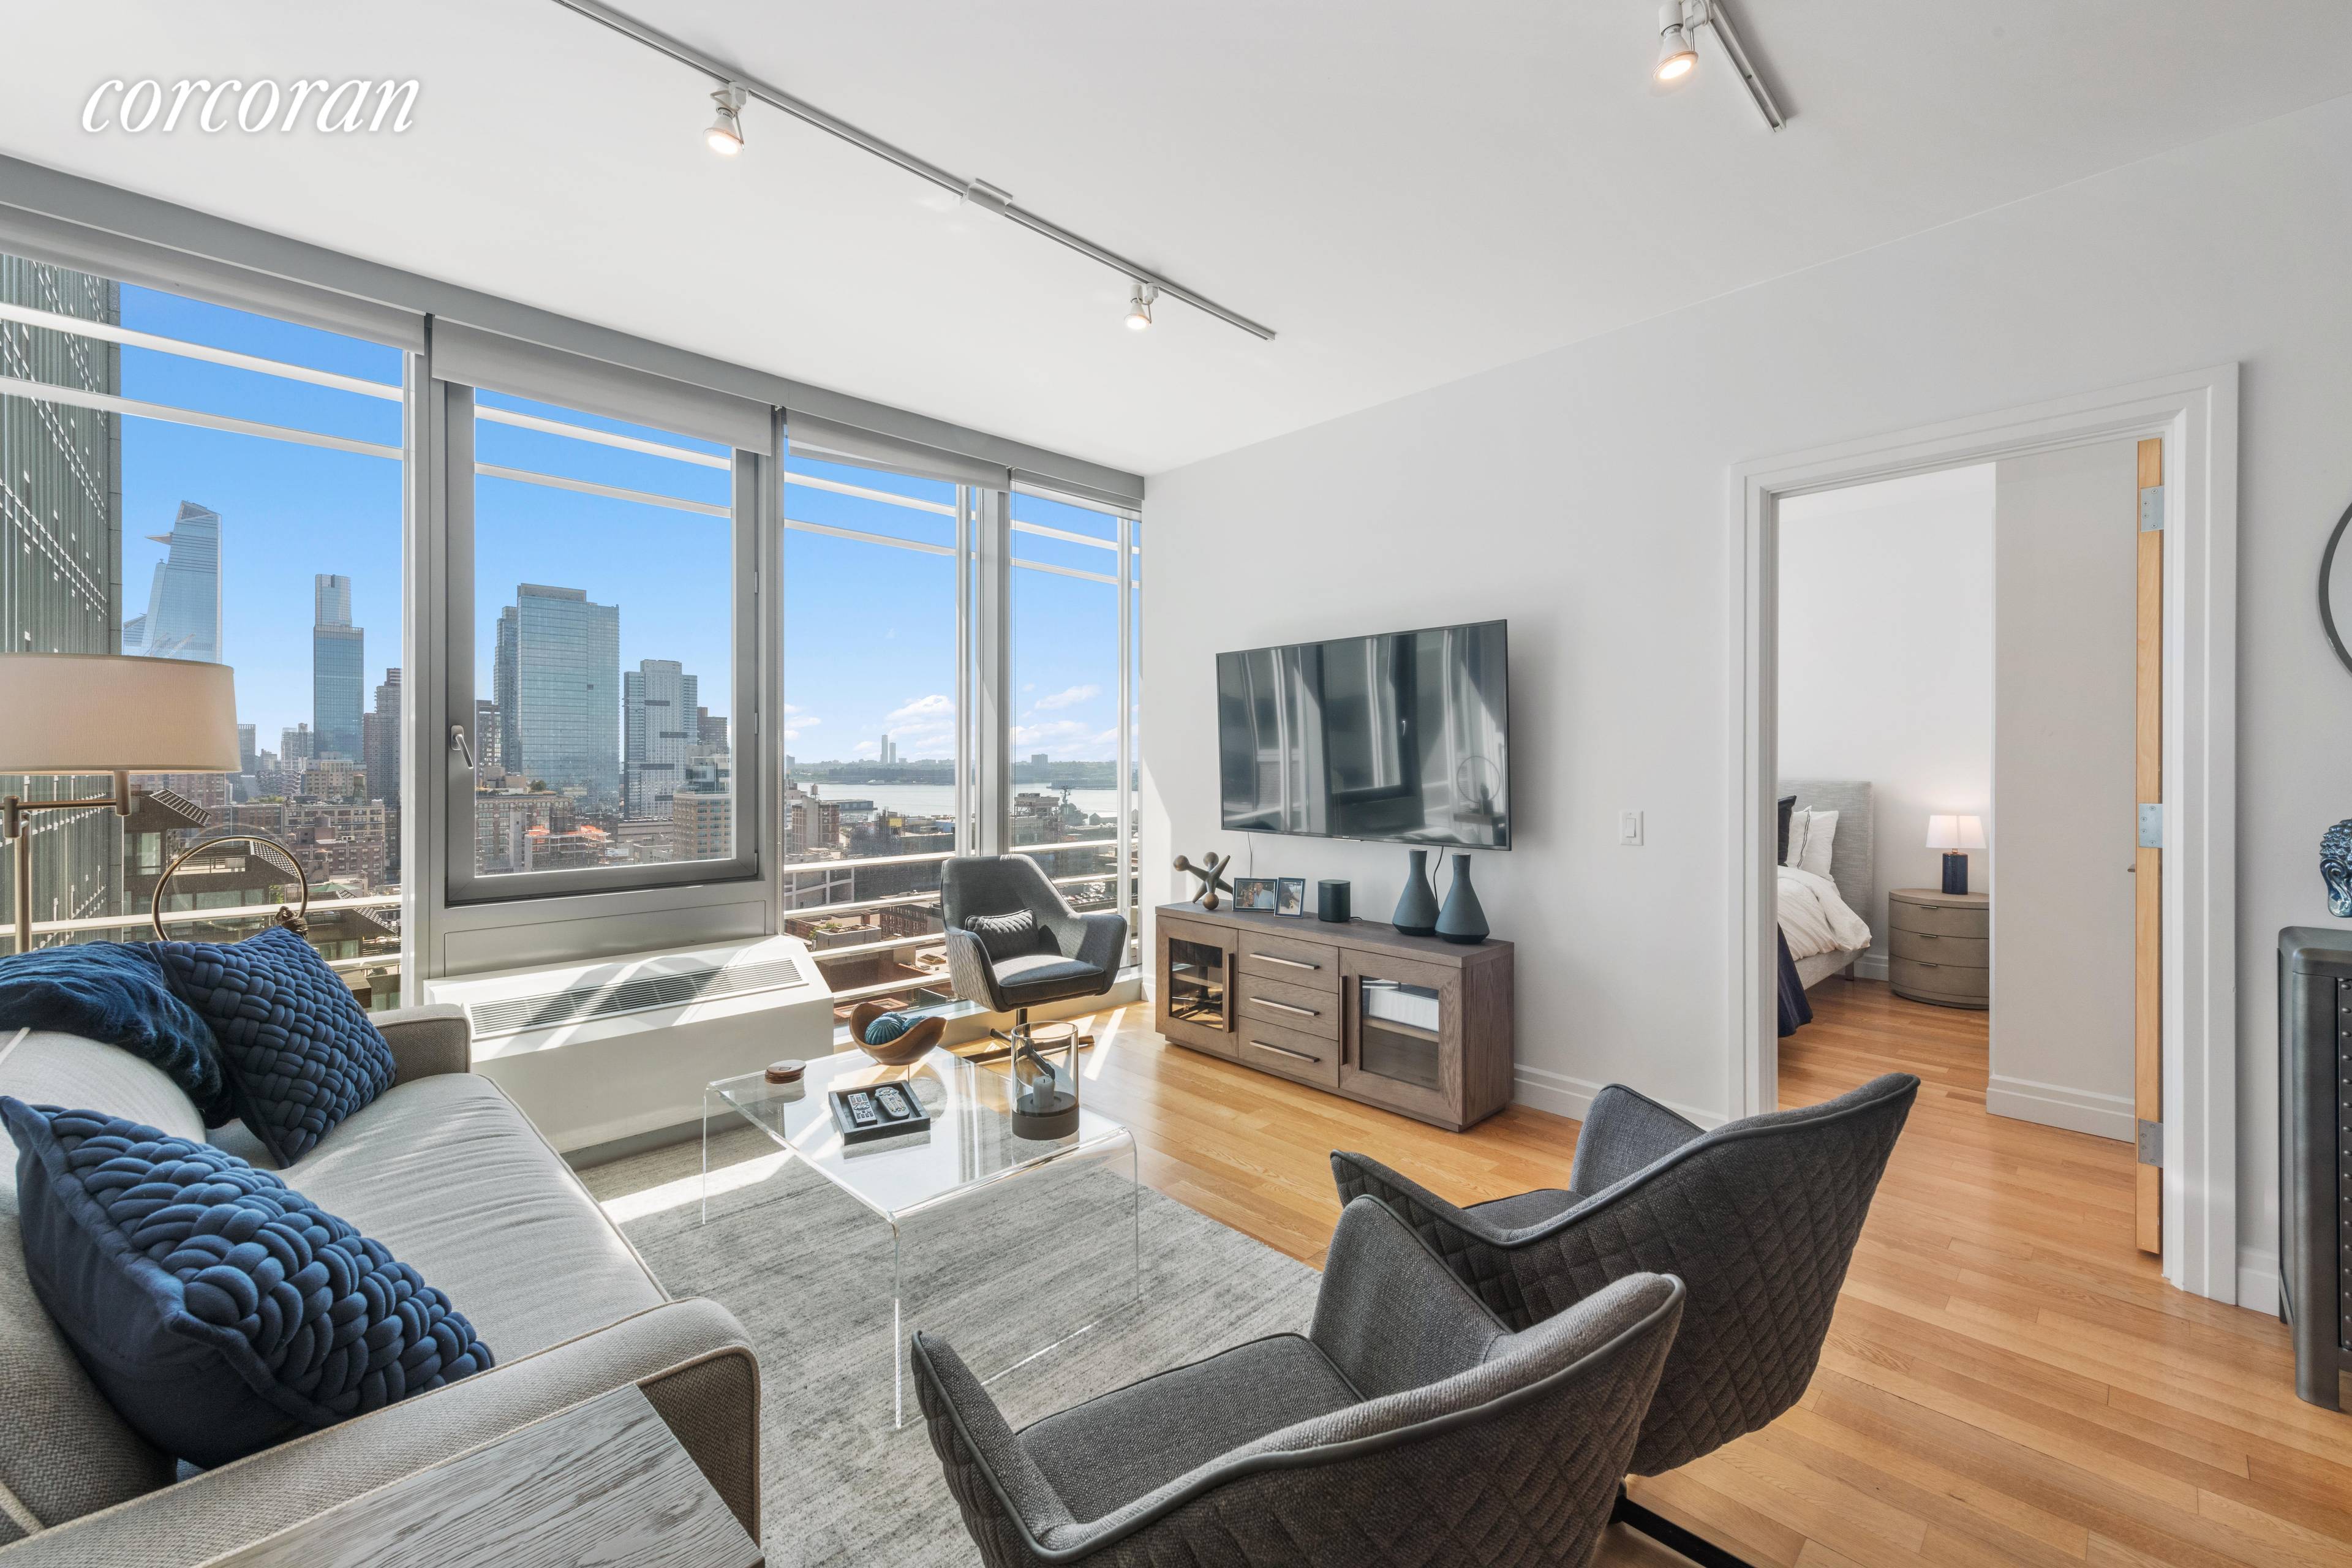 This luxurious 1 bedroom 1 bath with extra office space boasts floor to ceiling windows that drench the residence with natural light.